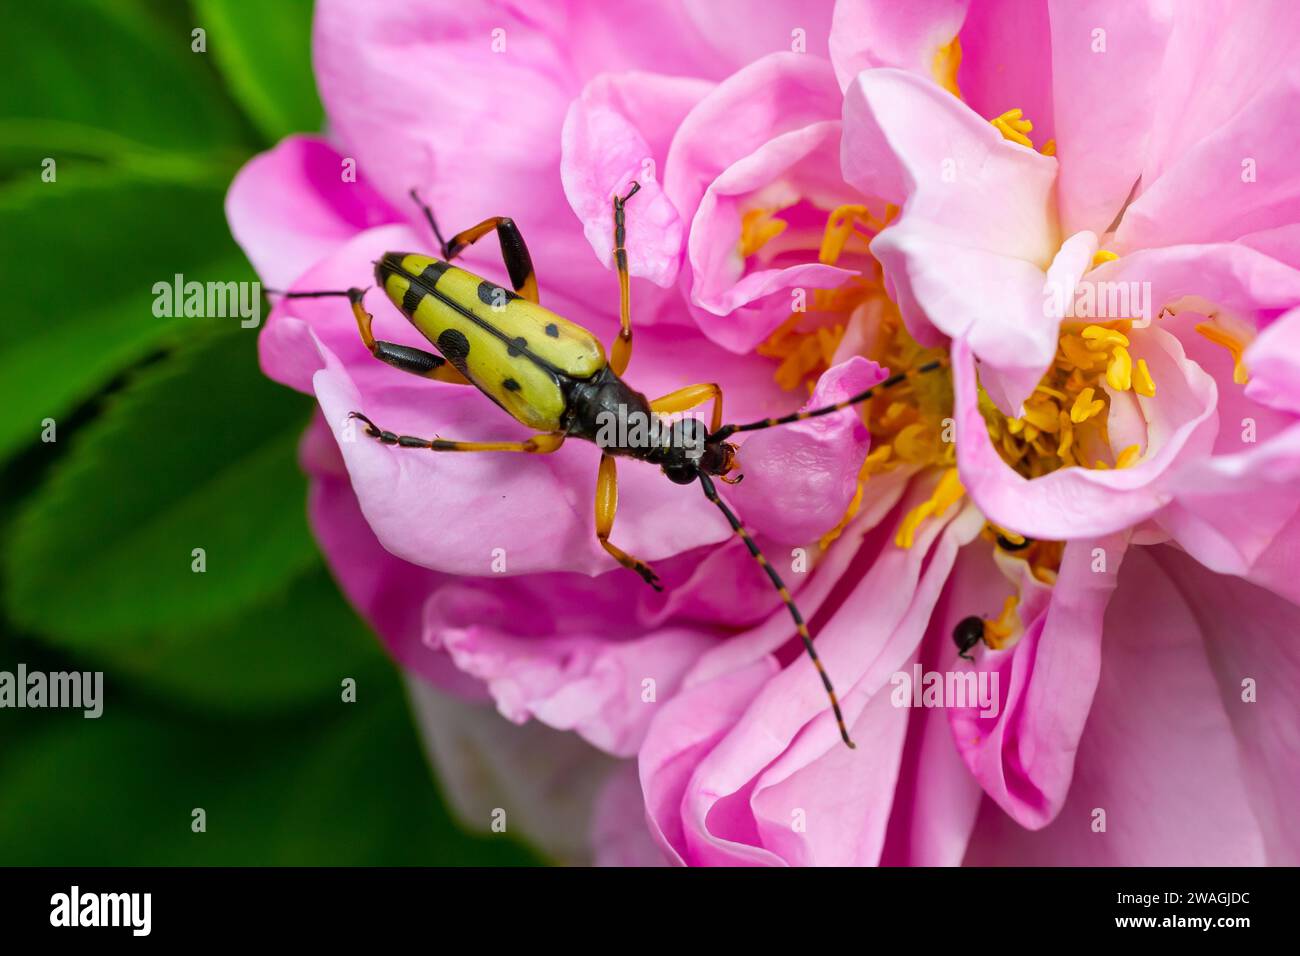 Closeup on a Spotted longhorn beetle, Leptura maculata on the pink flower, Daucus carota. Stock Photo